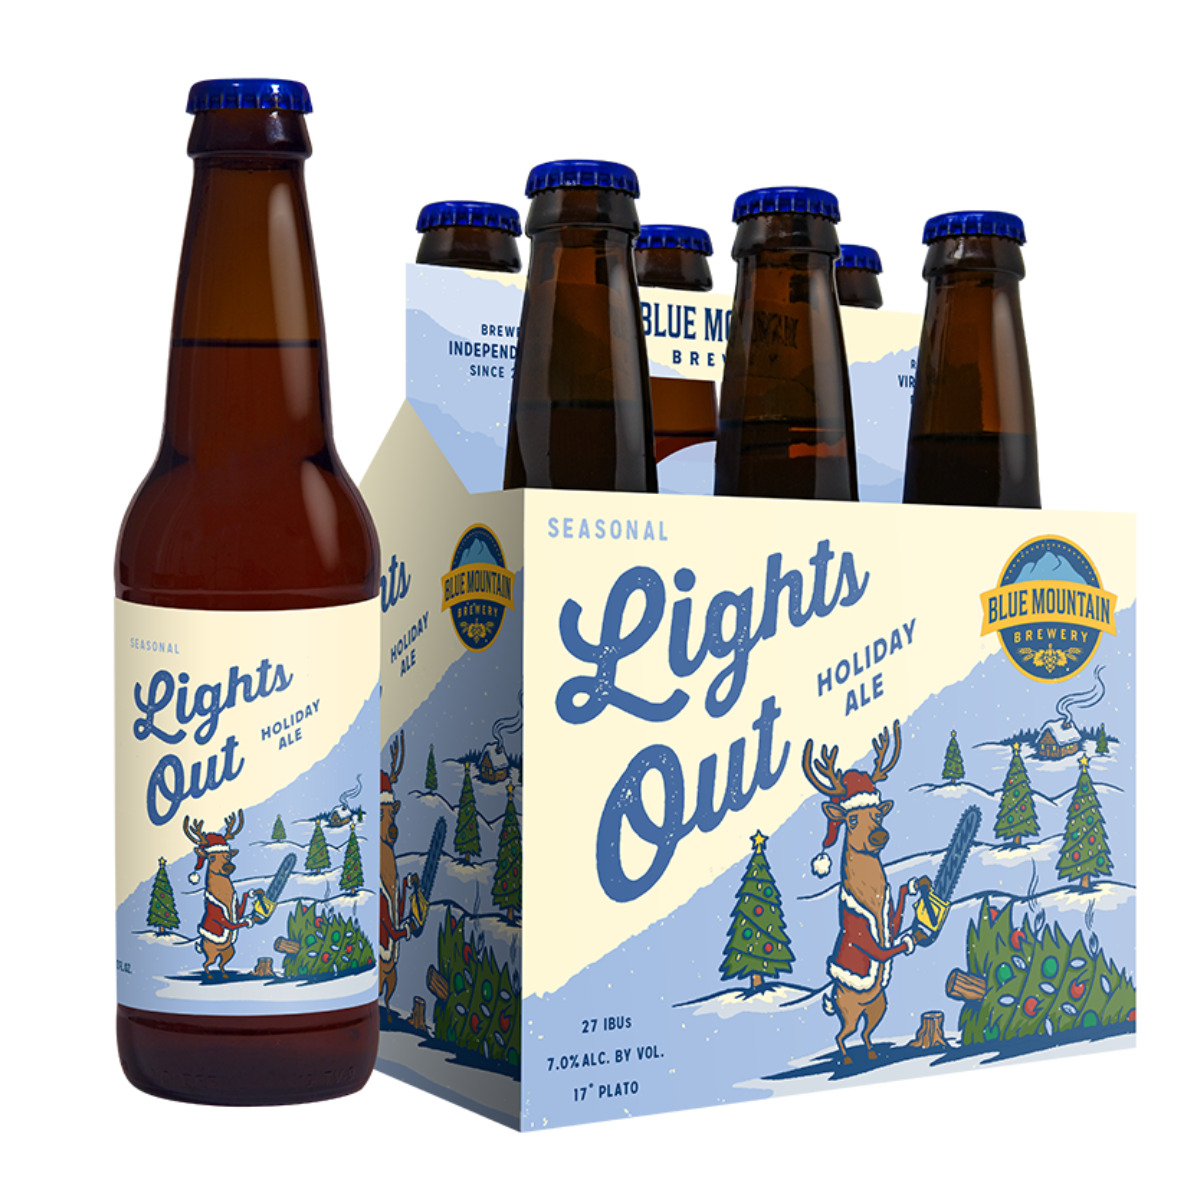 Six-pack of Lights Out, one of the fall beers from Blue Mountain Brewery